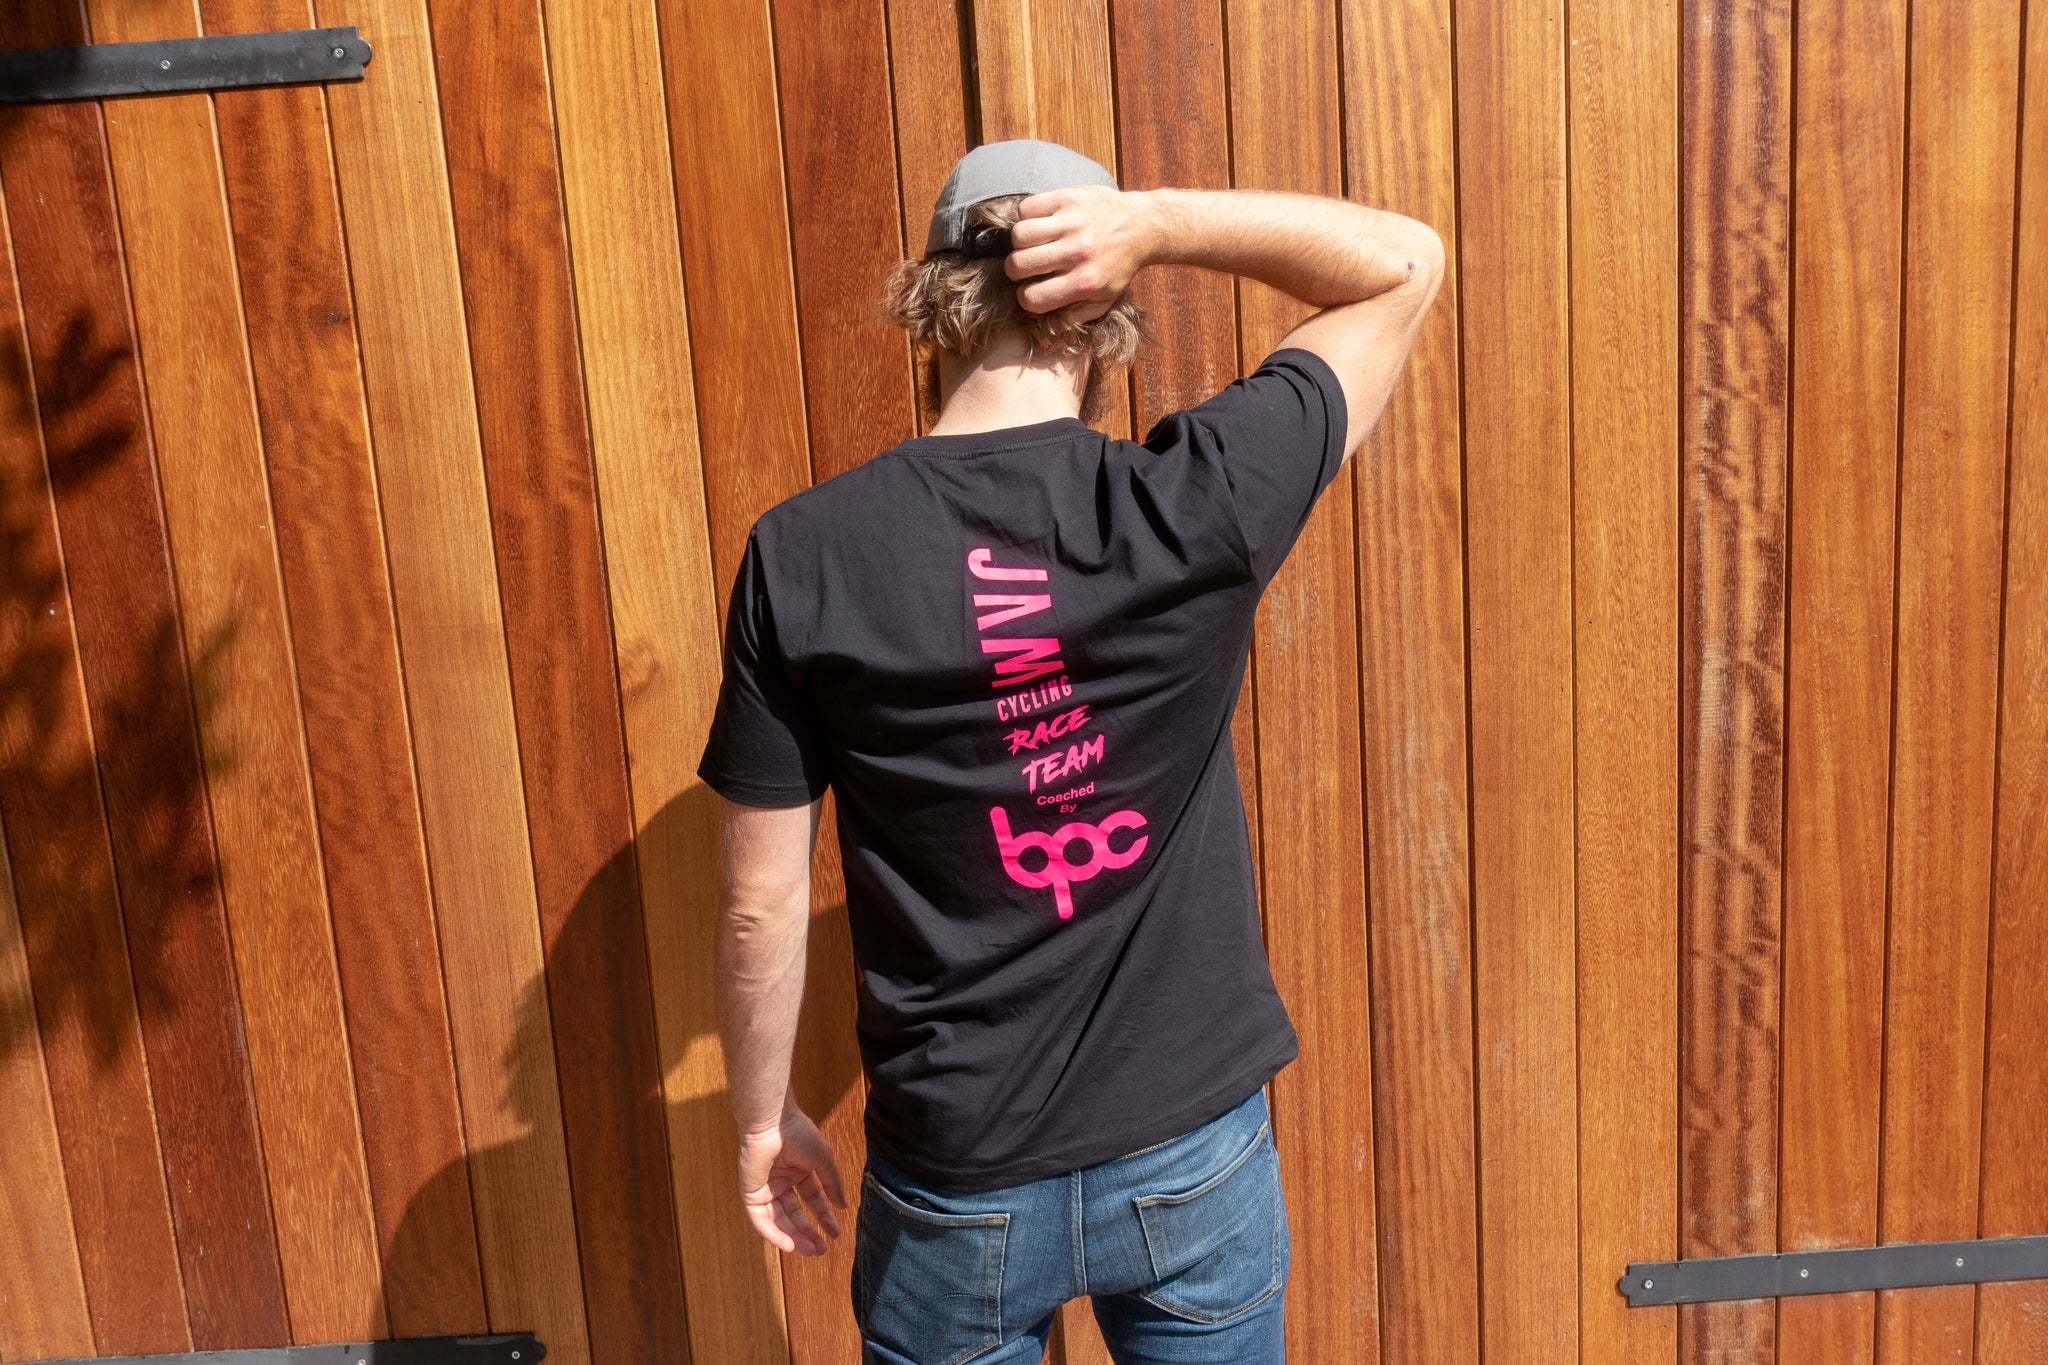 Black JAM Race team t-shirt featuring HOT logos worn by Jam CEO with blue jeans and brown beltagainst barn door